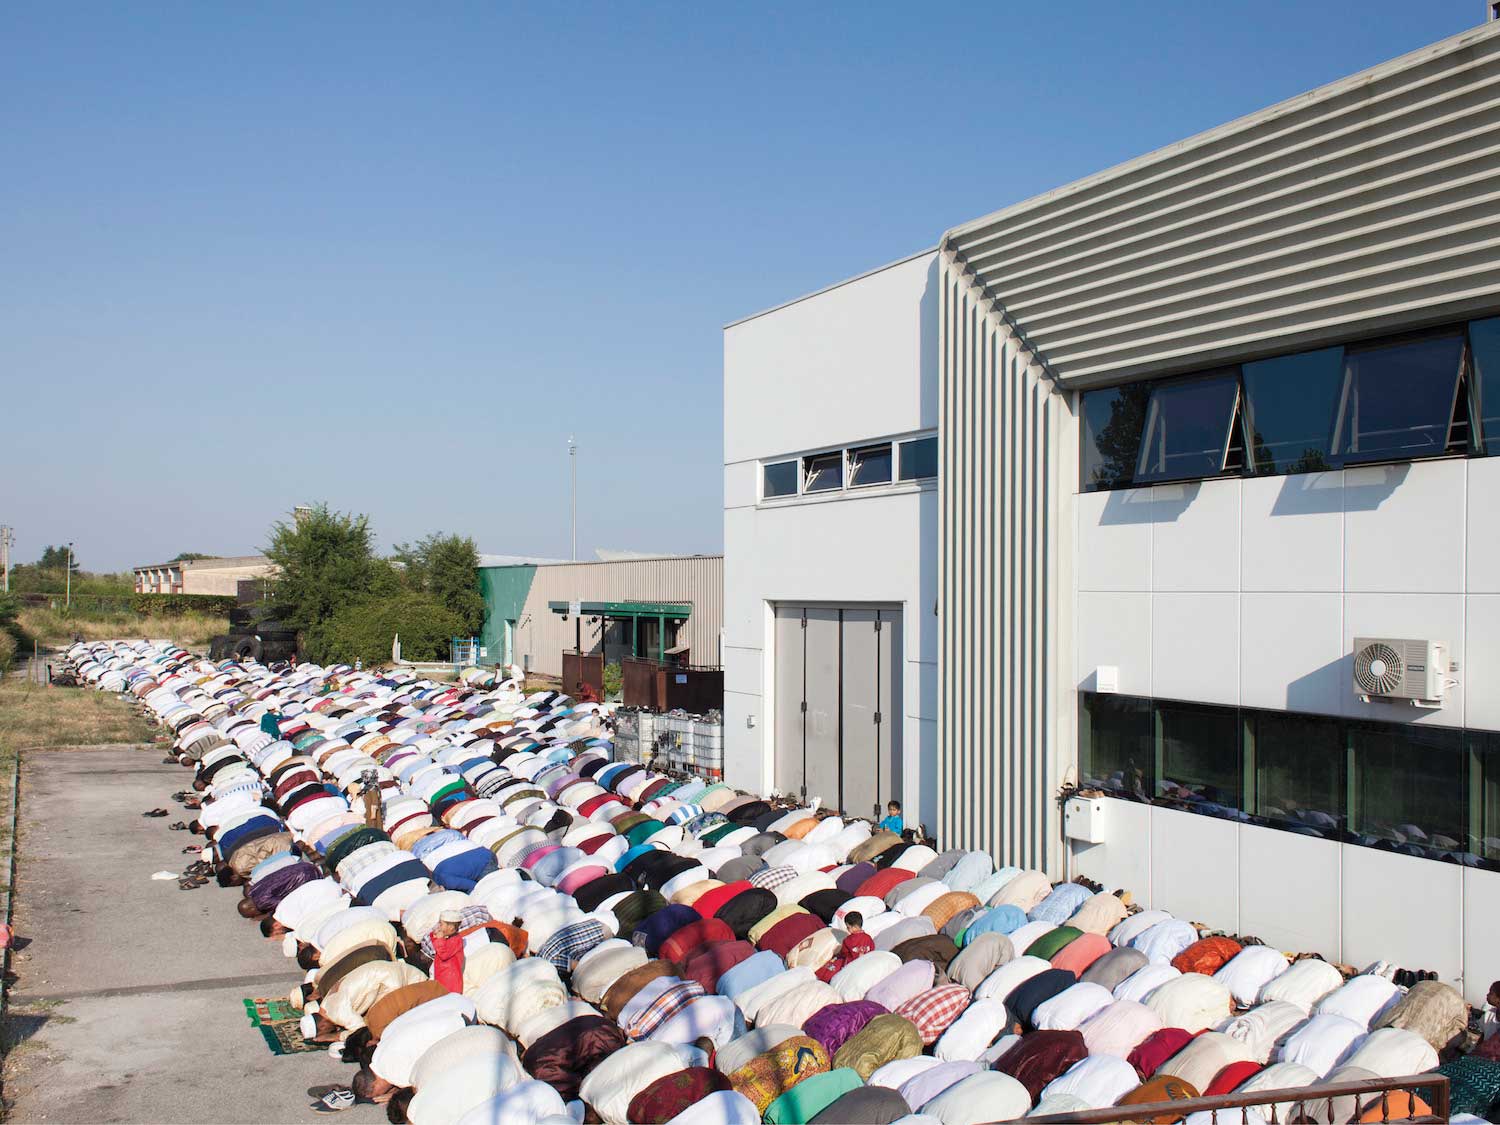 A warehouse used as a makeshift place of worship for Muslims in the Province of Treviso, Italy.